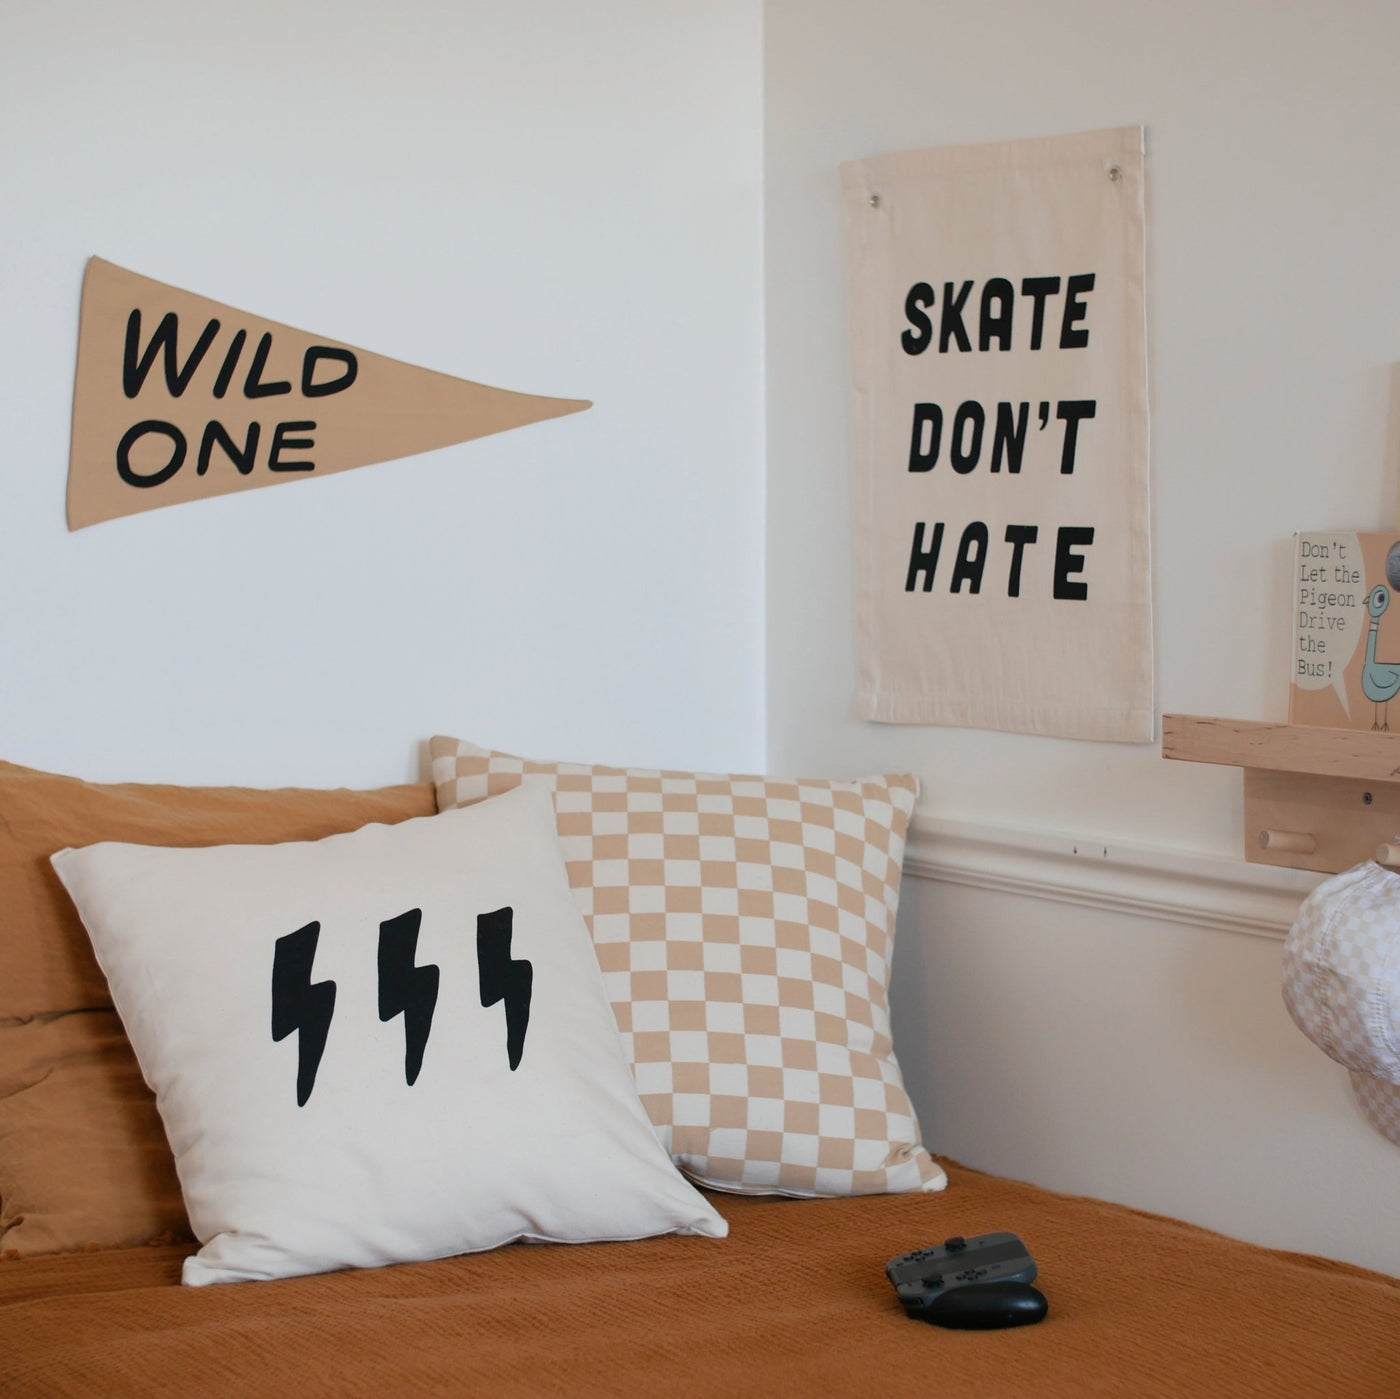 wild one pennant - Sweet Water Decor - Wall Hanging